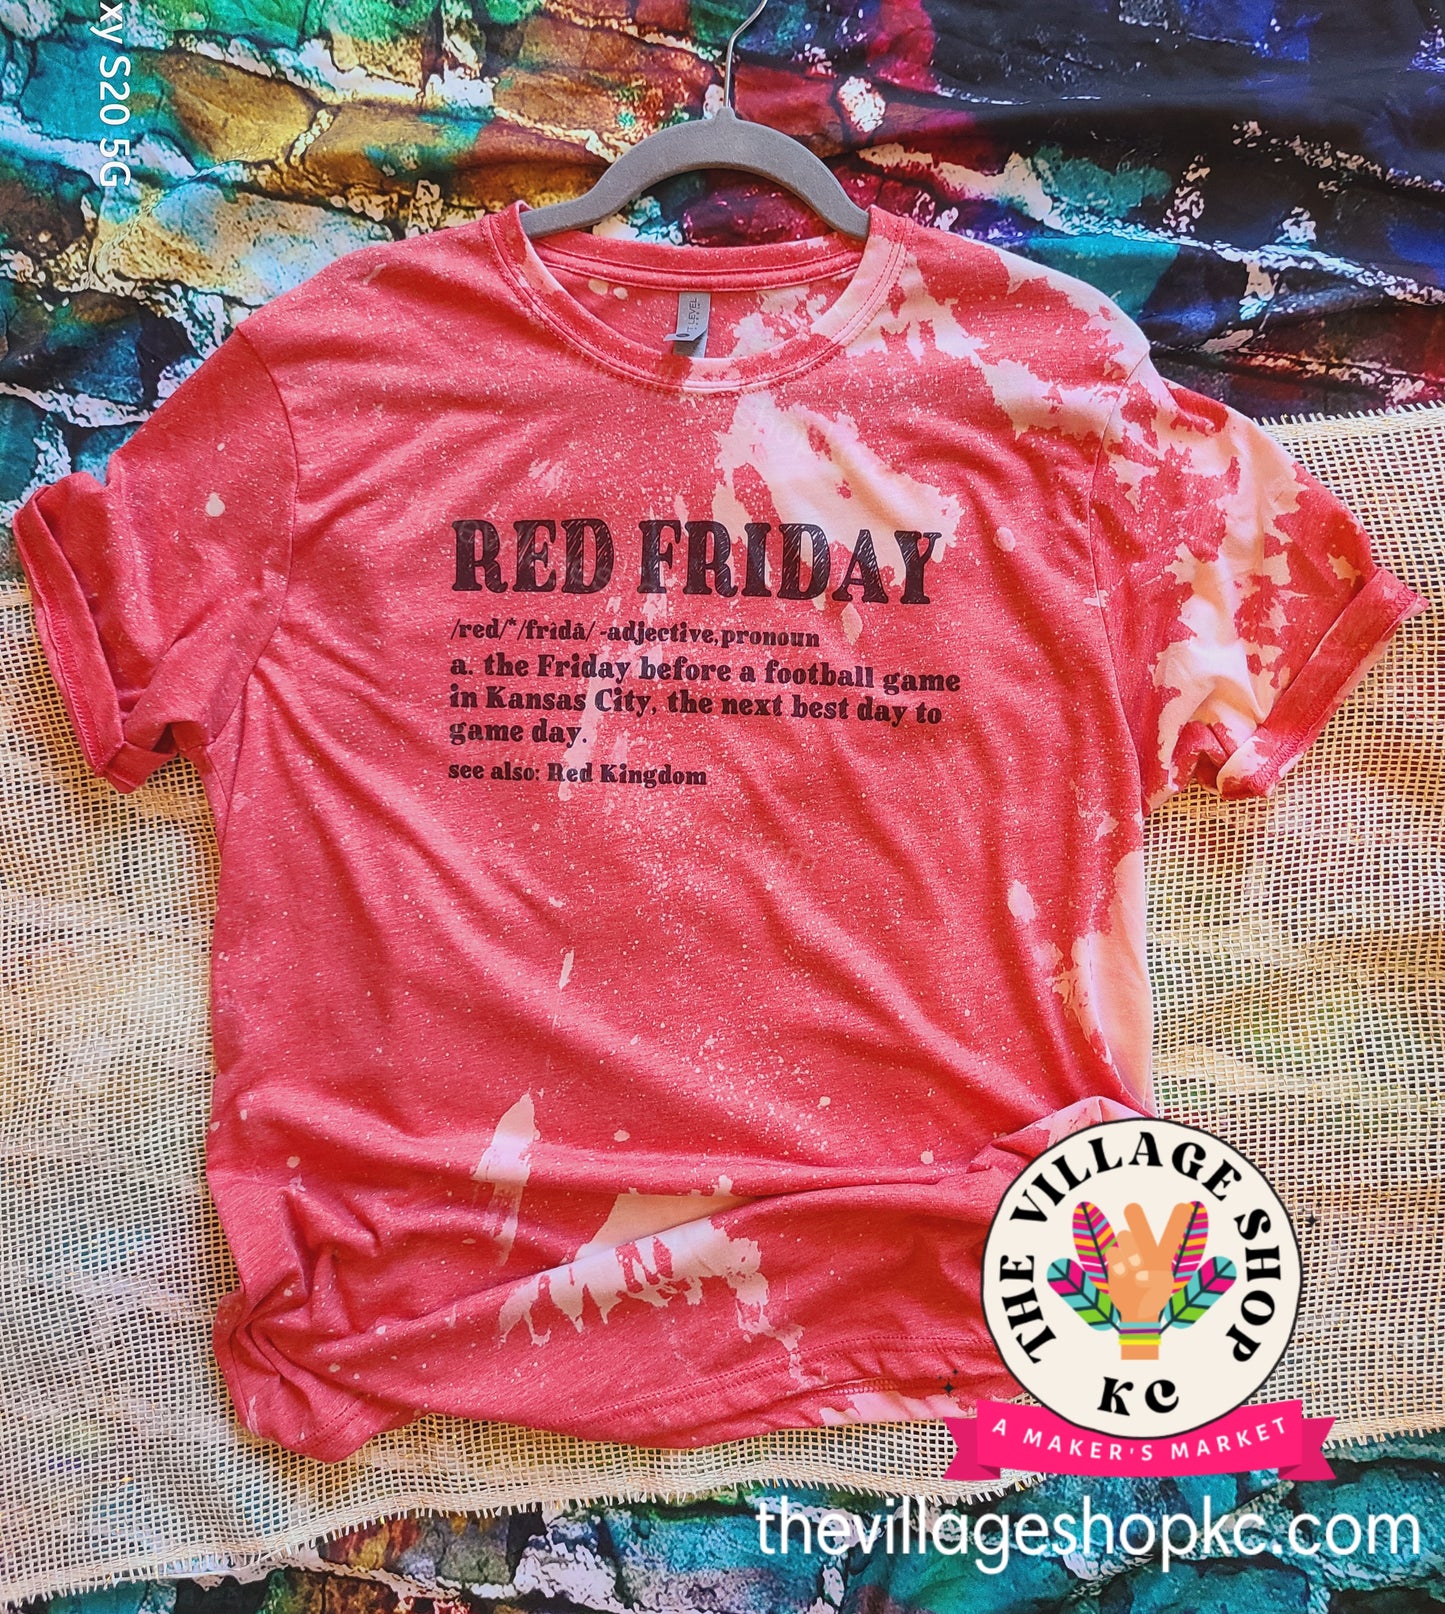 Red Friday Tee at The Village Shop KC